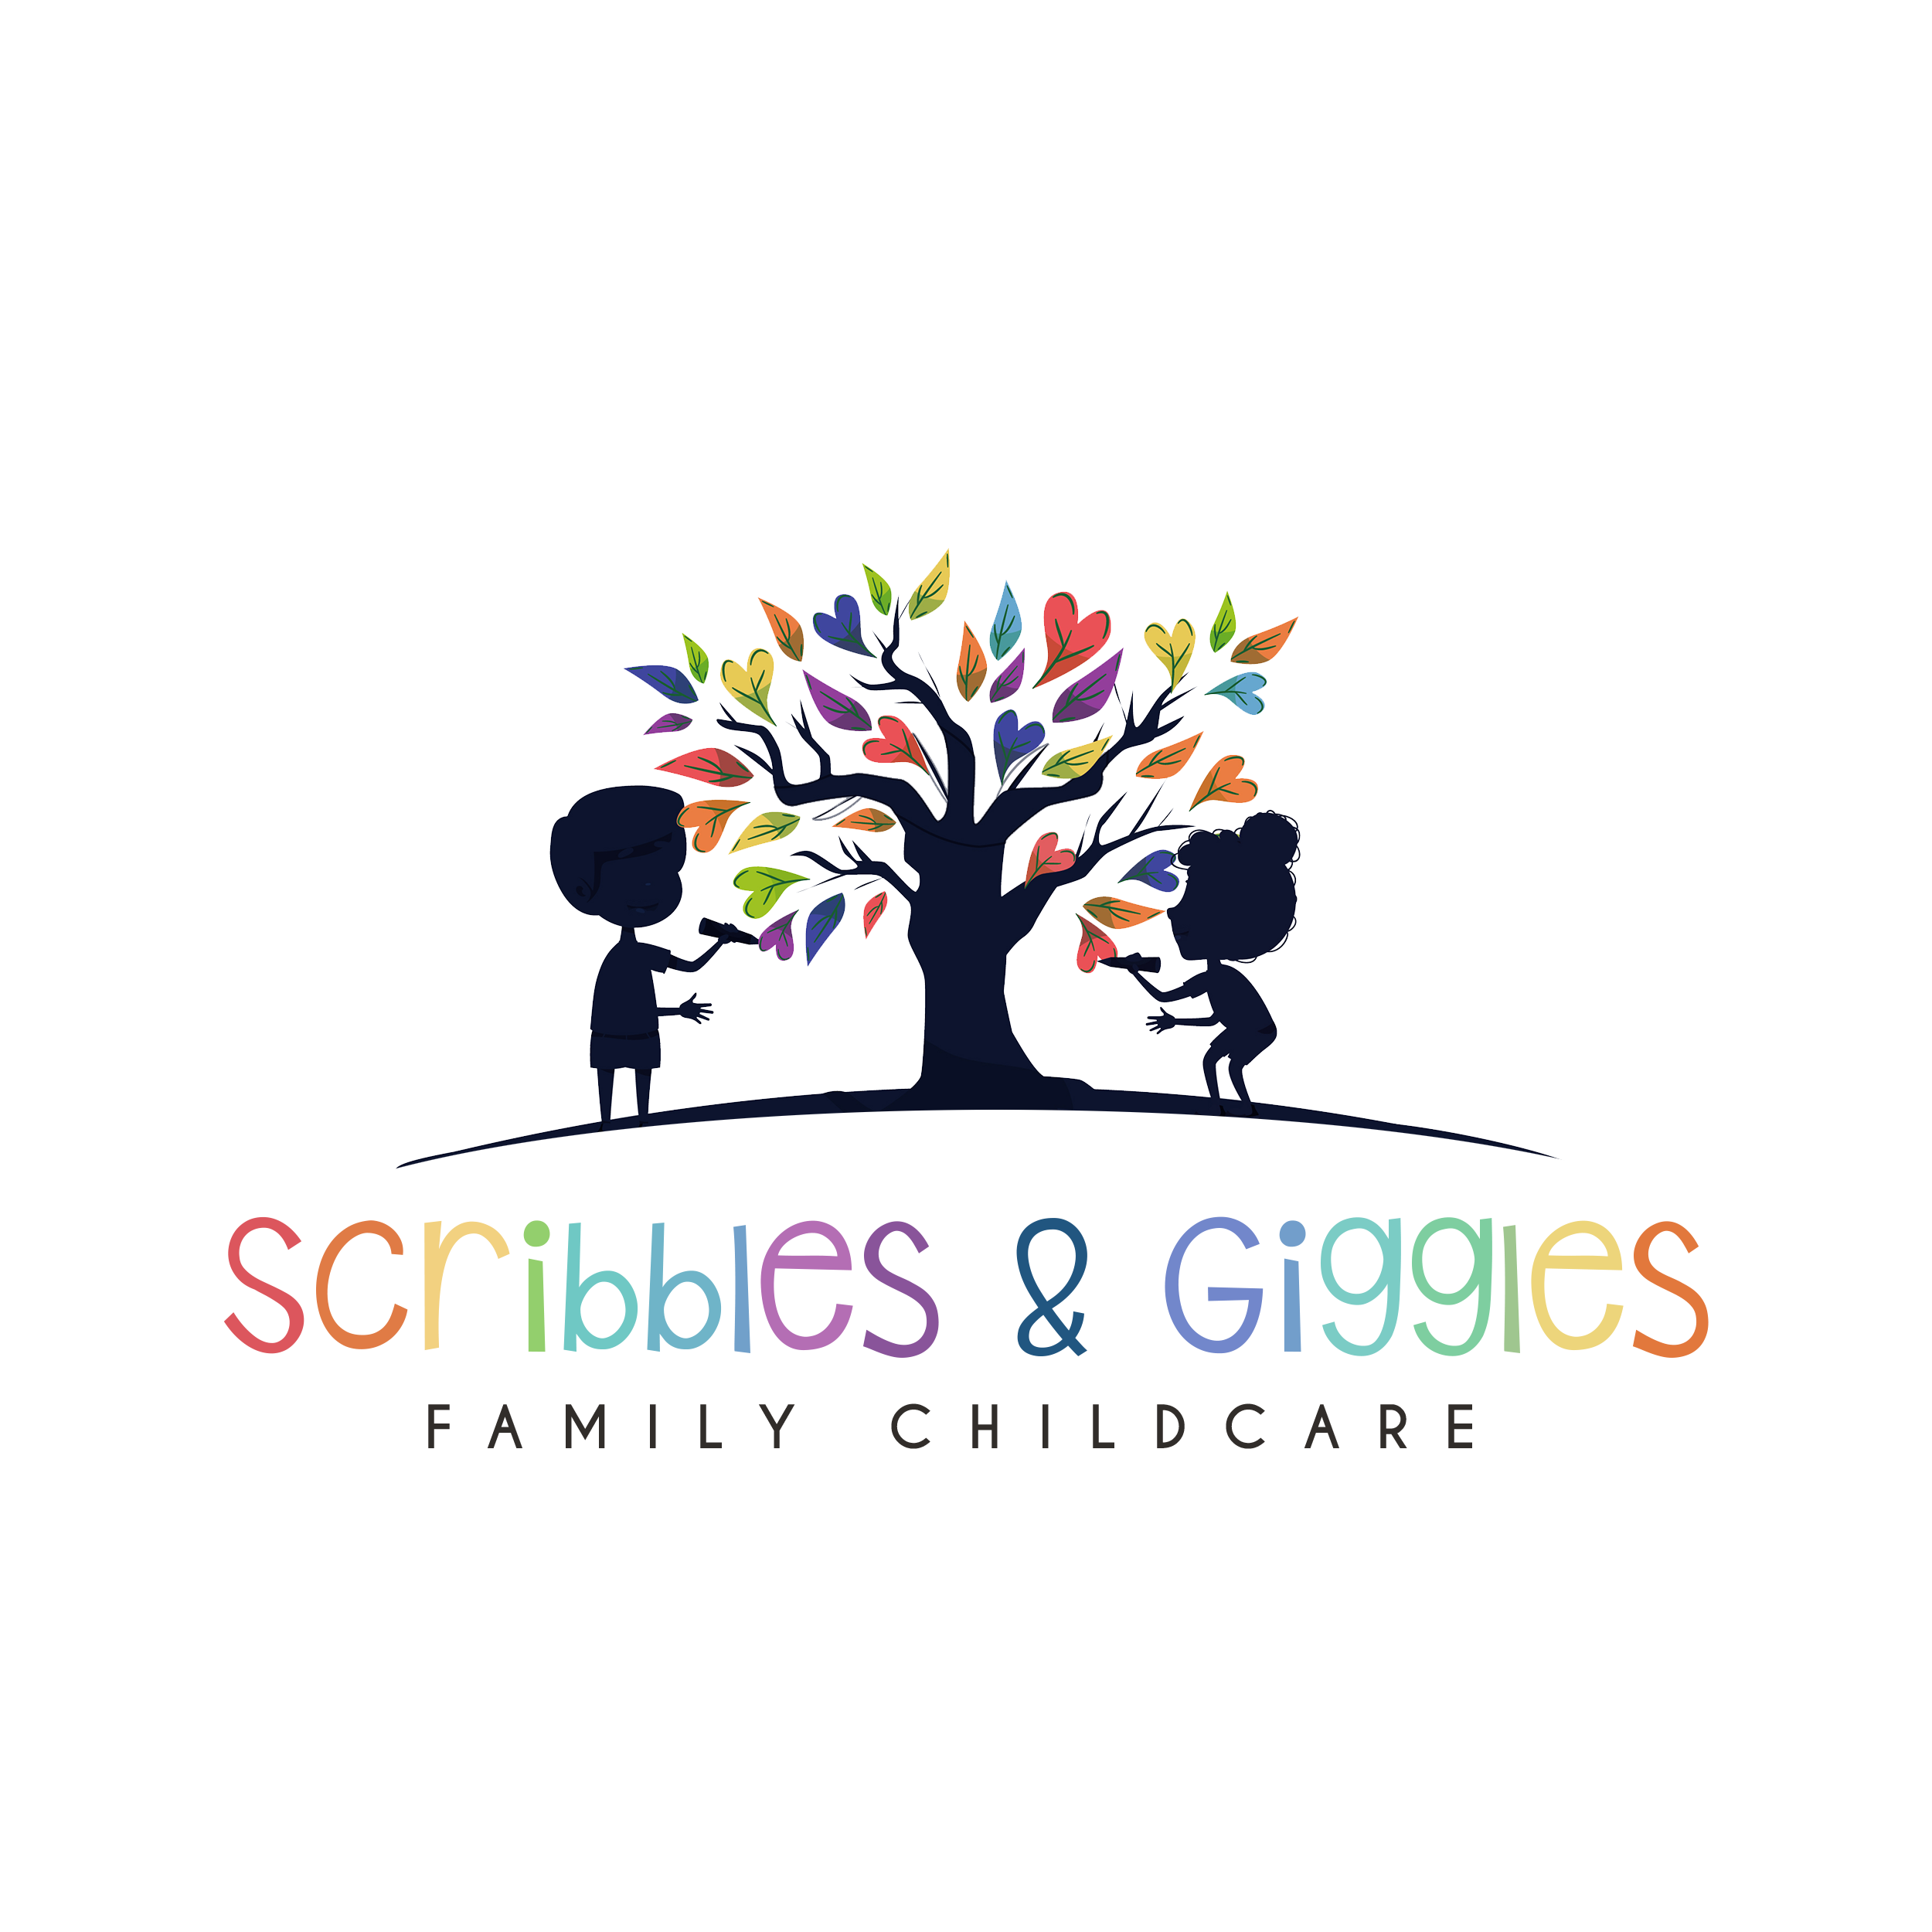 Scribbles & Giggles Family Childcare